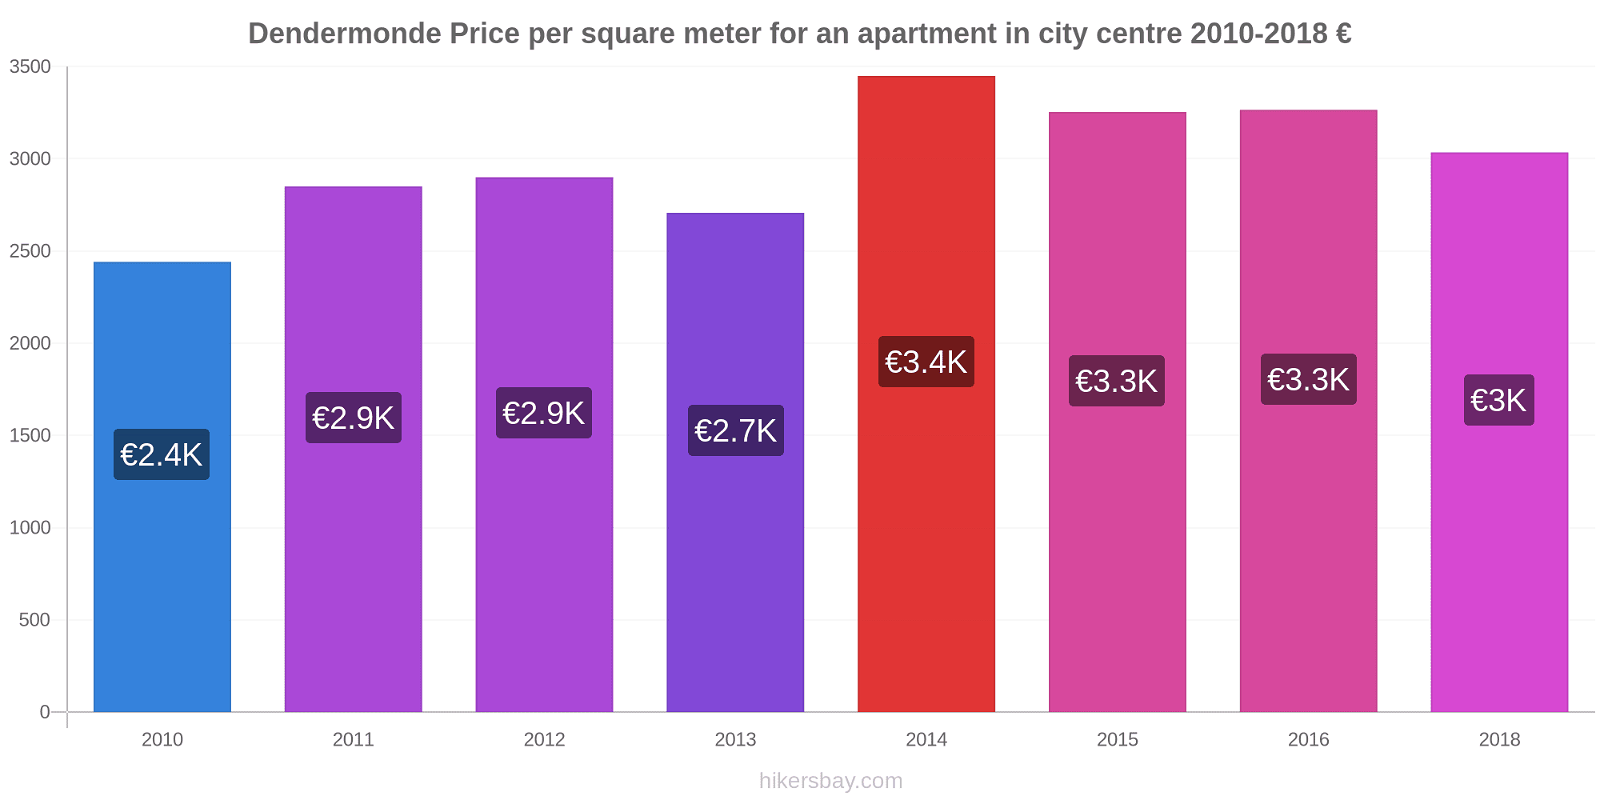 Dendermonde price changes Price per square meter for an apartment in city centre hikersbay.com